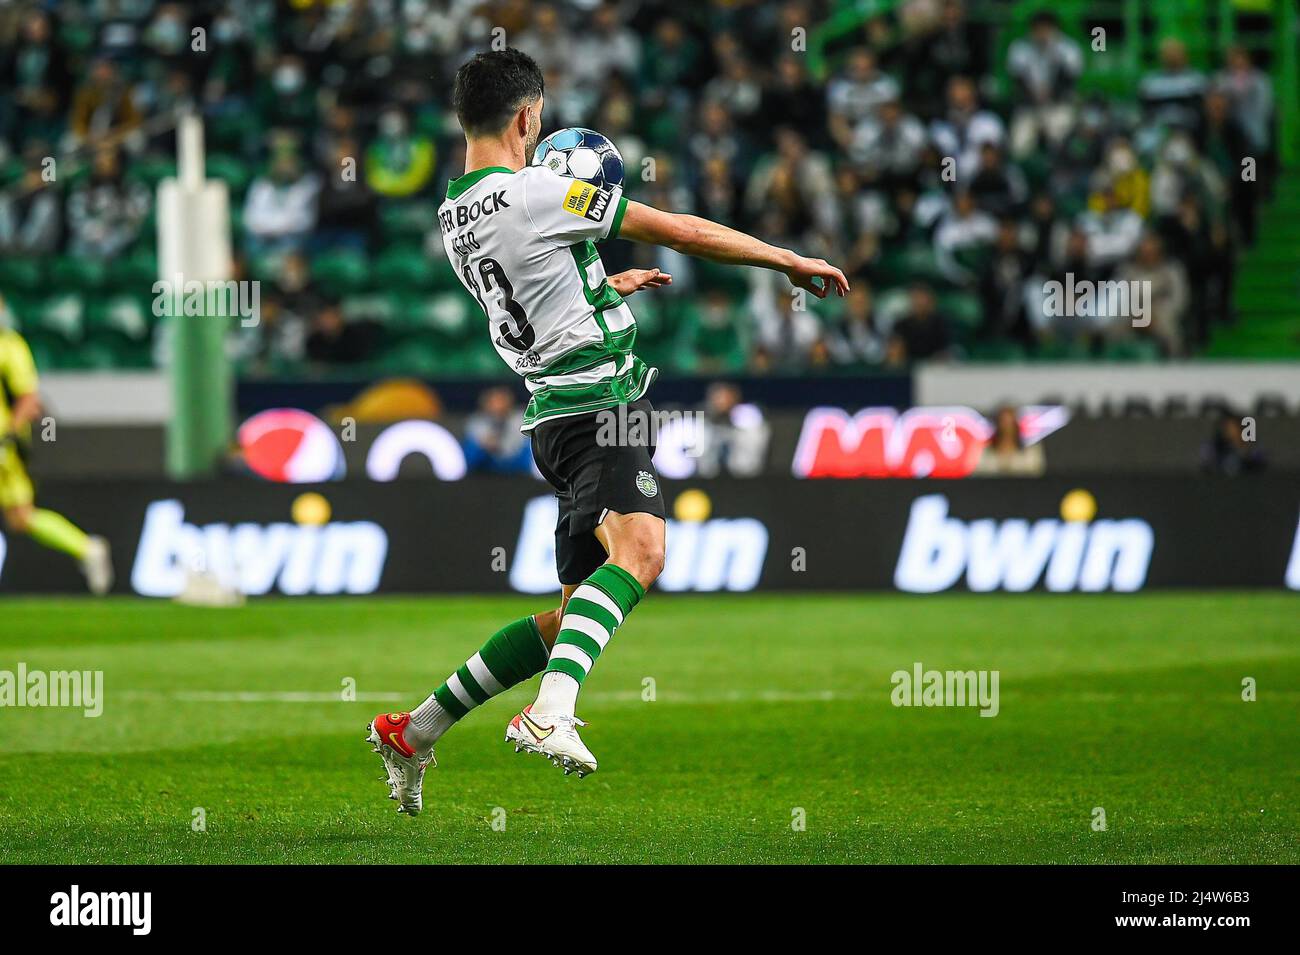 Lisbon, Portugal. 17th Apr, 2022. Luis Neto from Sporting seen in action during the Liga Bwin football match between Sporting and Benfica at Estadio Jose Alvalade. Final score: Sporting 0:2 Benfica. (Photo by Bruno de Carvalho/SOPA Images/Sipa USA) Credit: Sipa USA/Alamy Live News Stock Photo